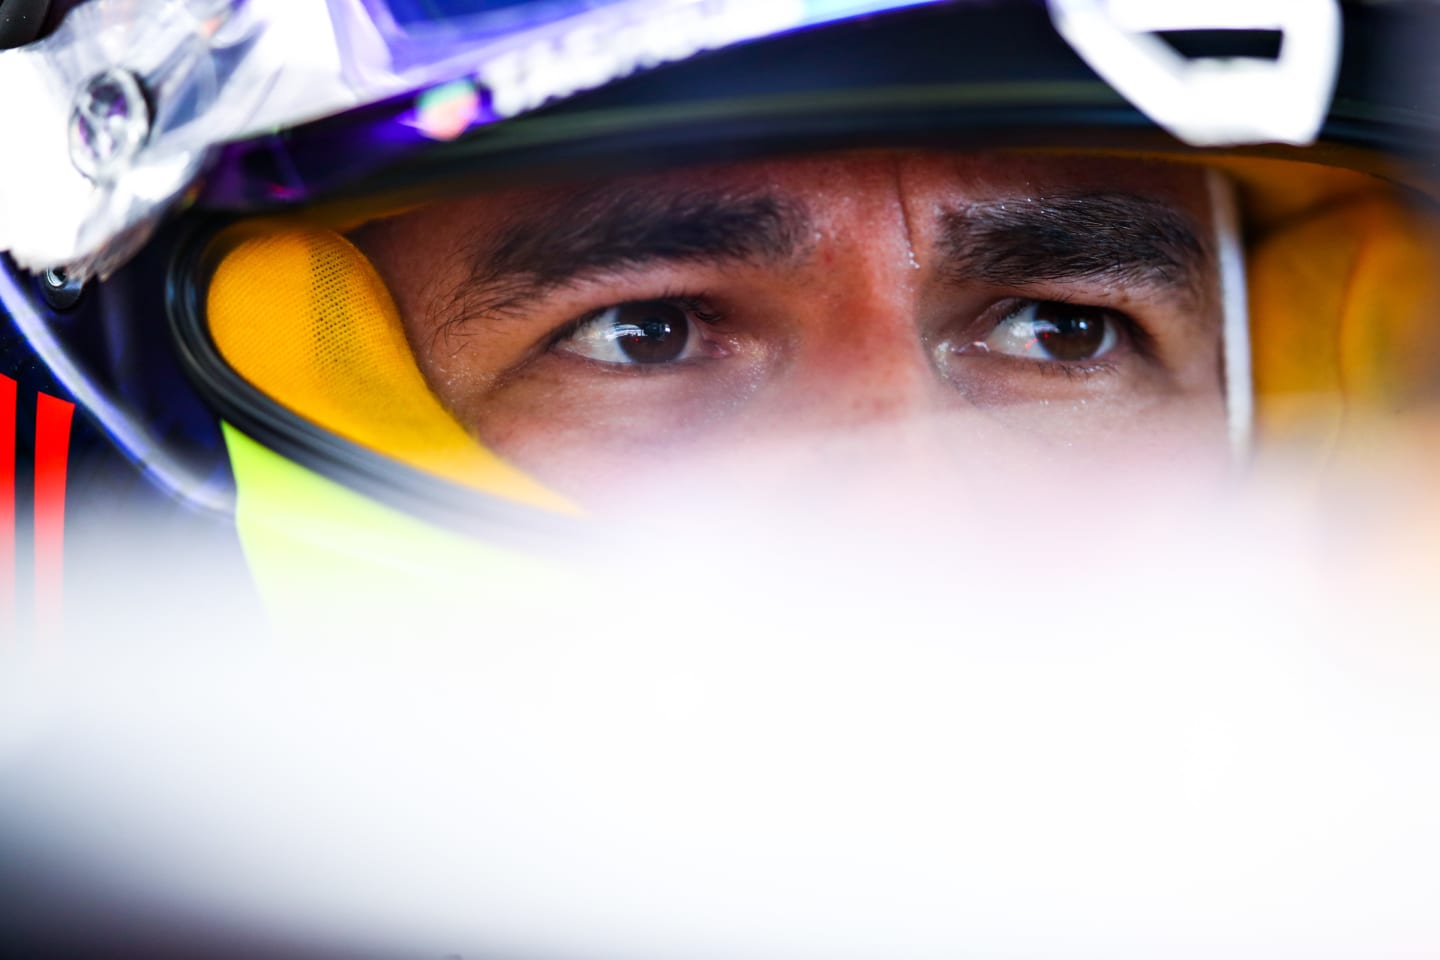 BARCELONA, SPAIN - MAY 08: Sergio Perez of Mexico and Red Bull Racing prepares to drive in the